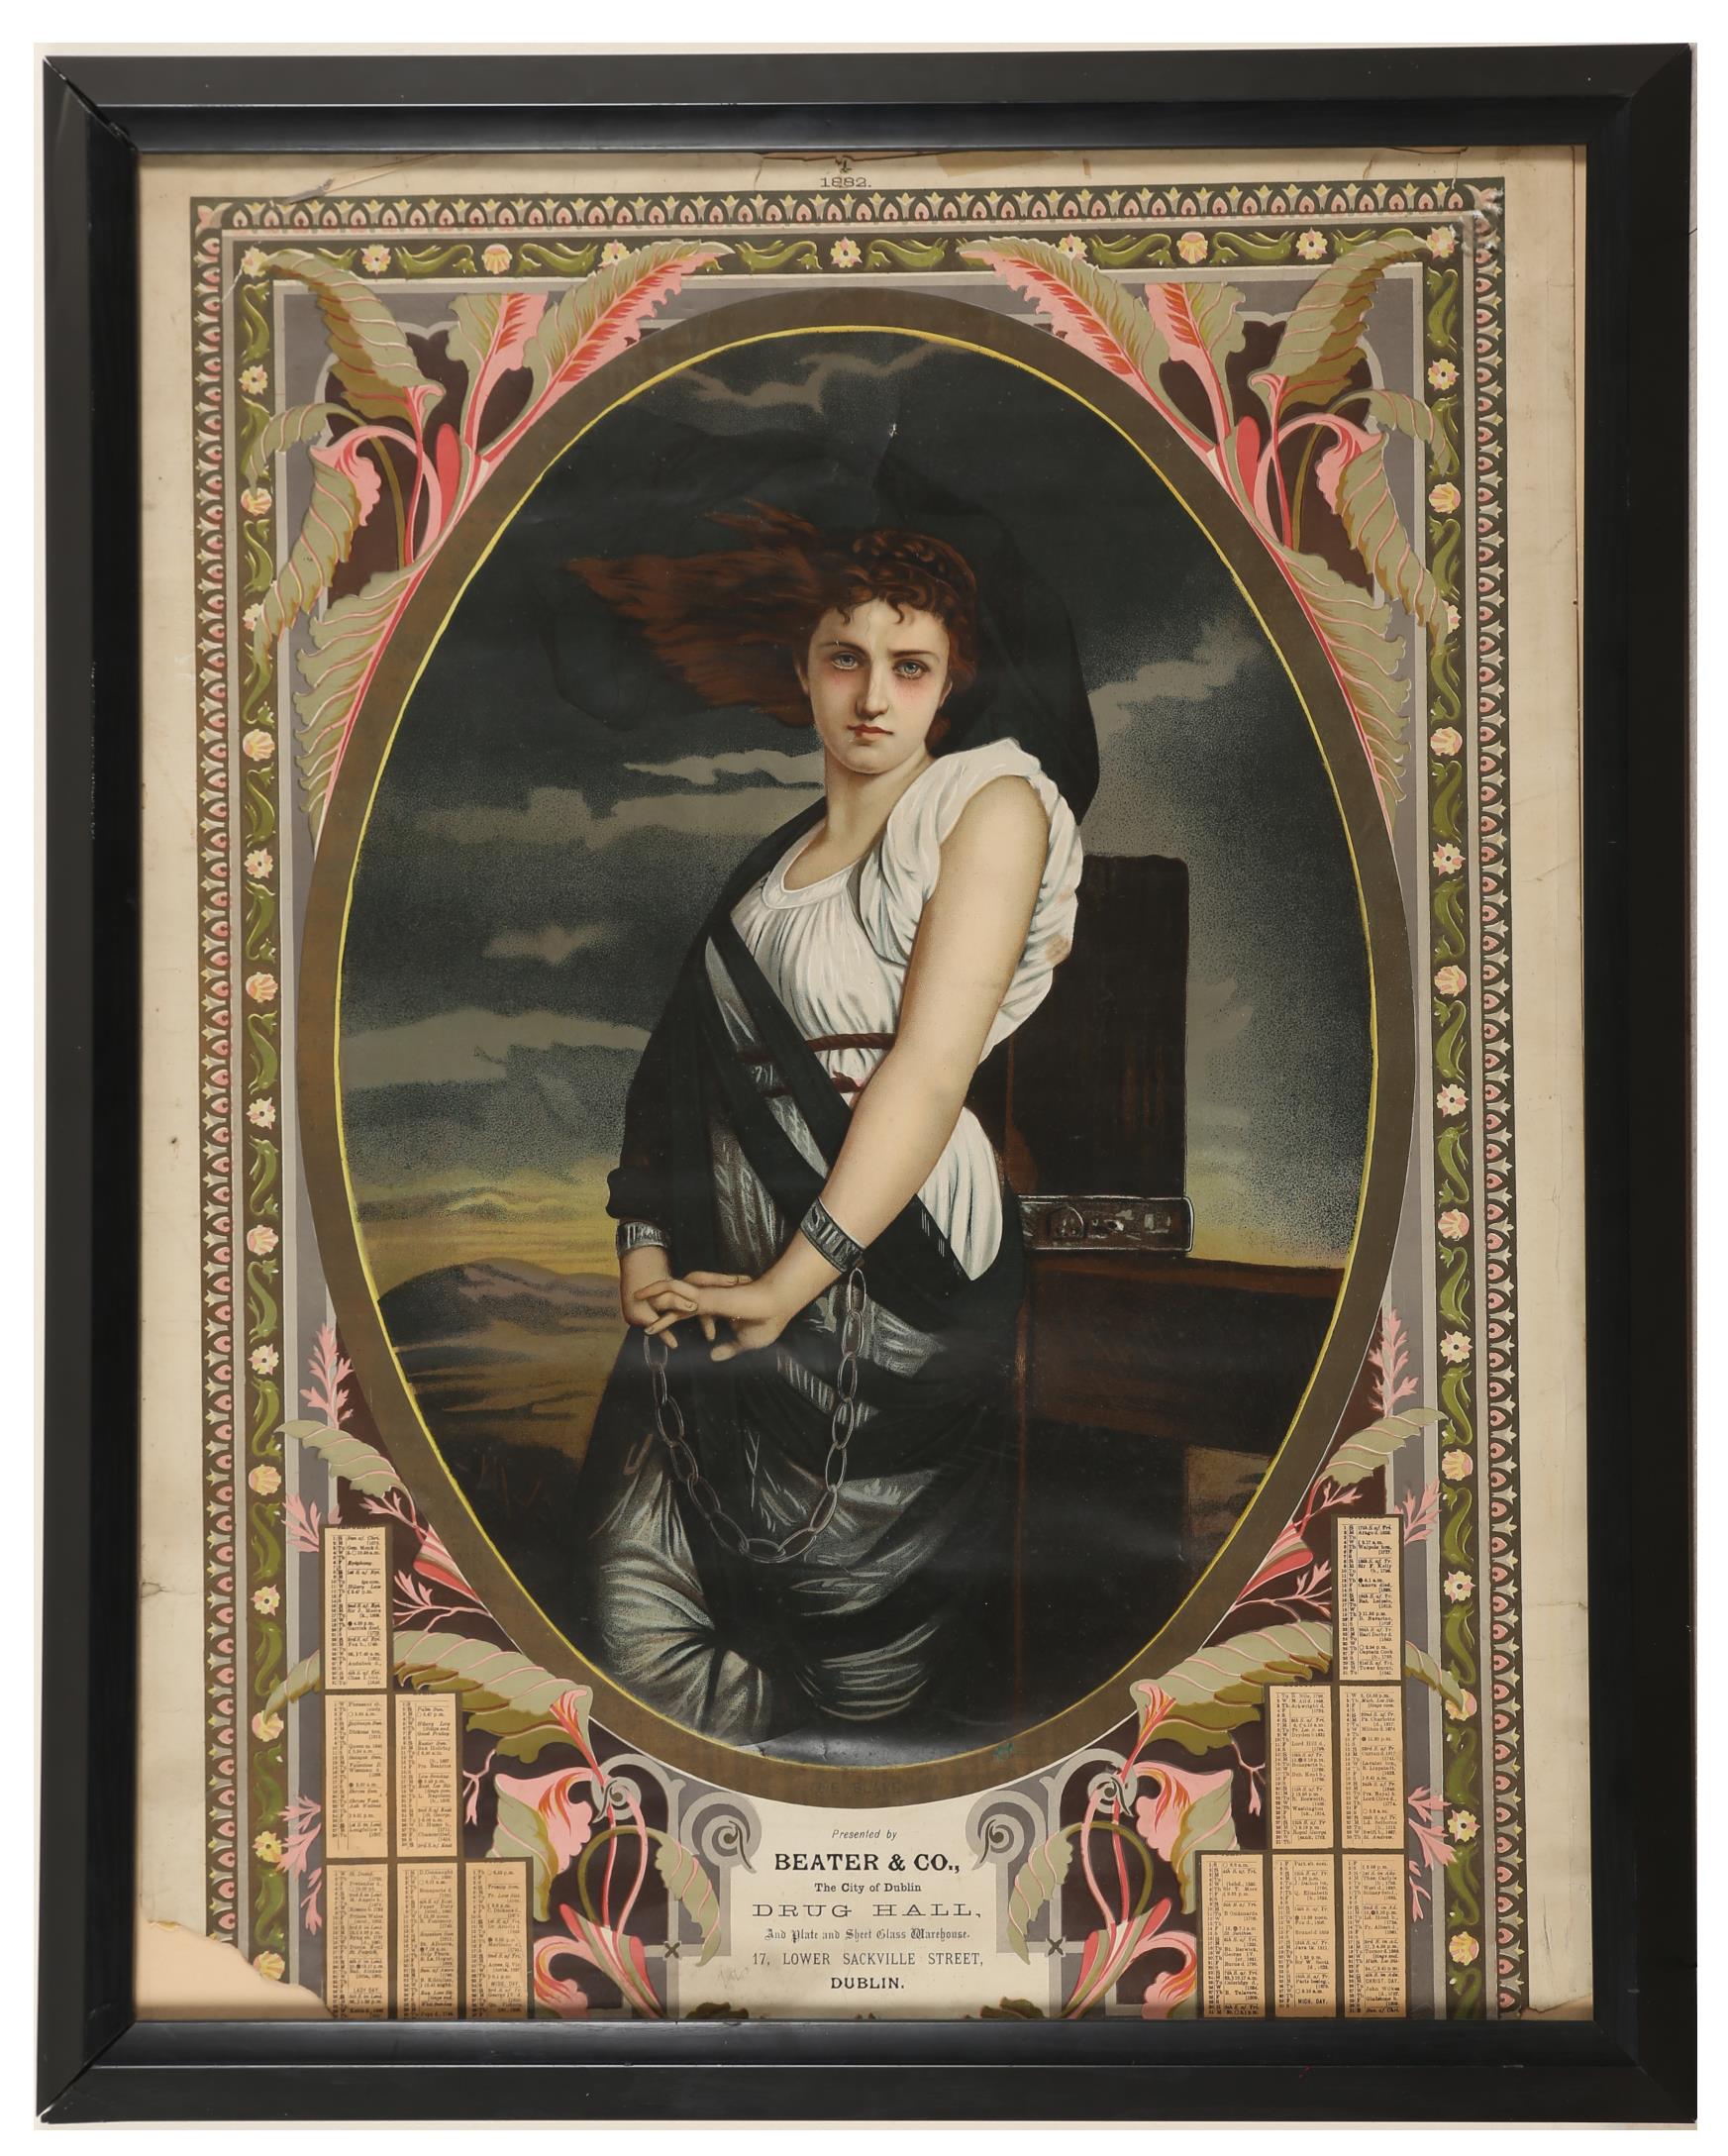 1882 Nationalist colour poster, a woman in chains representing Ireland, above an advertisement for